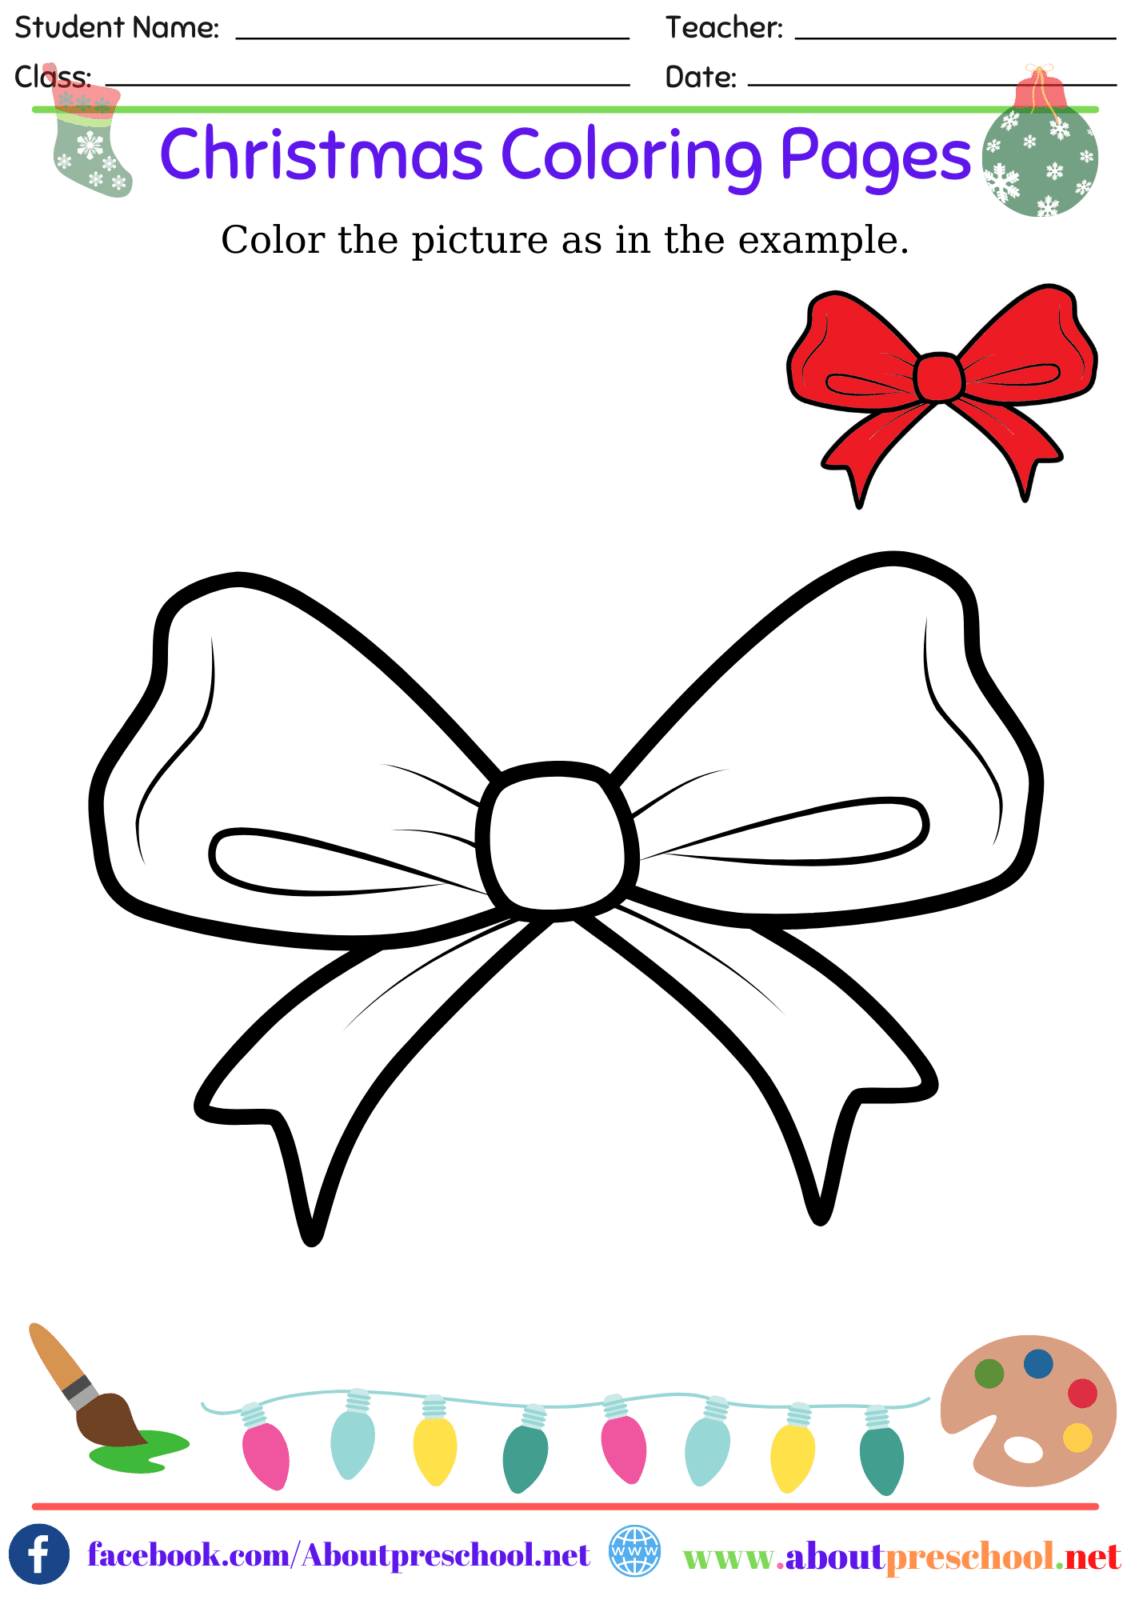 Christmas Coloring Pages-3